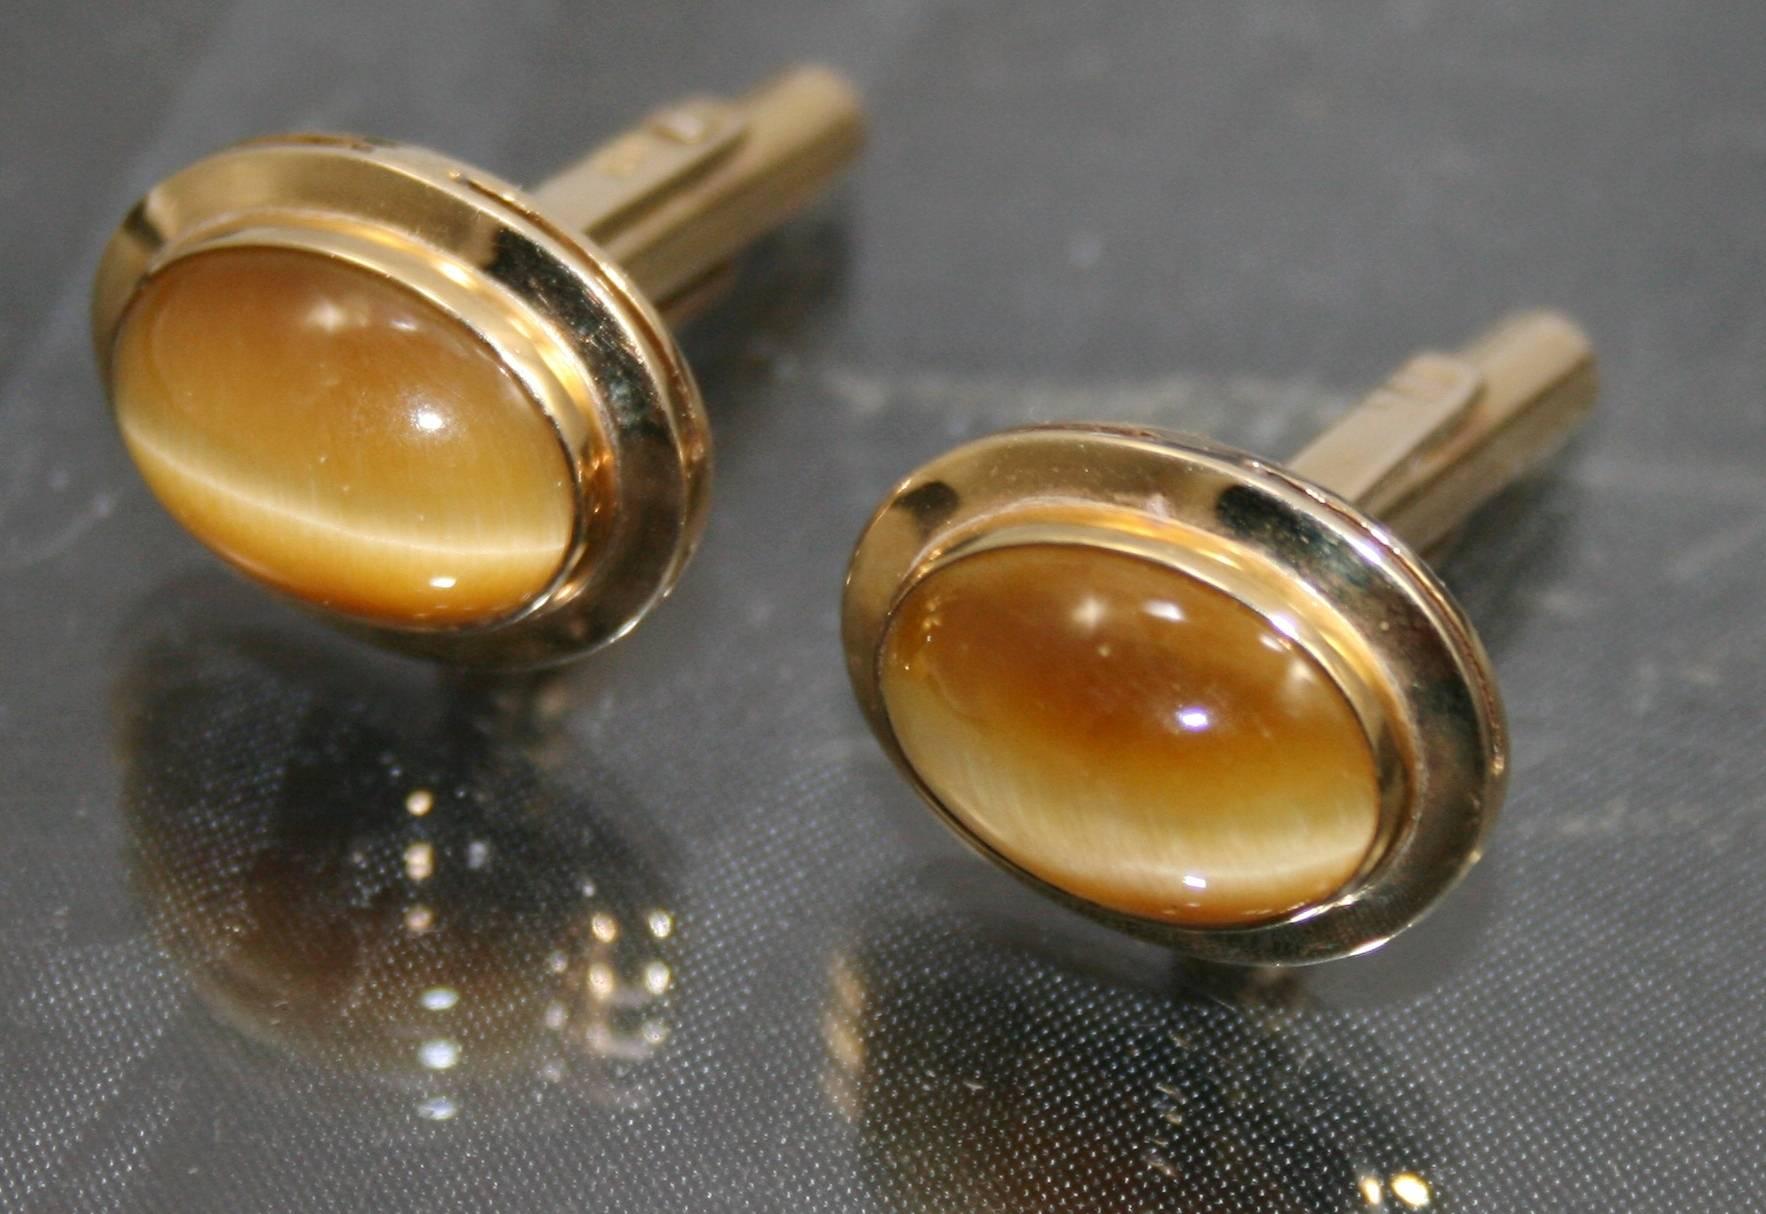 

Stone	Tiger's eye
Gold	14k, stamped
Total weight	9.38 g
Condition	Very good commensurate with age

FREE UK Mainland Delivery.

Please enquire for overseas delivery costs.